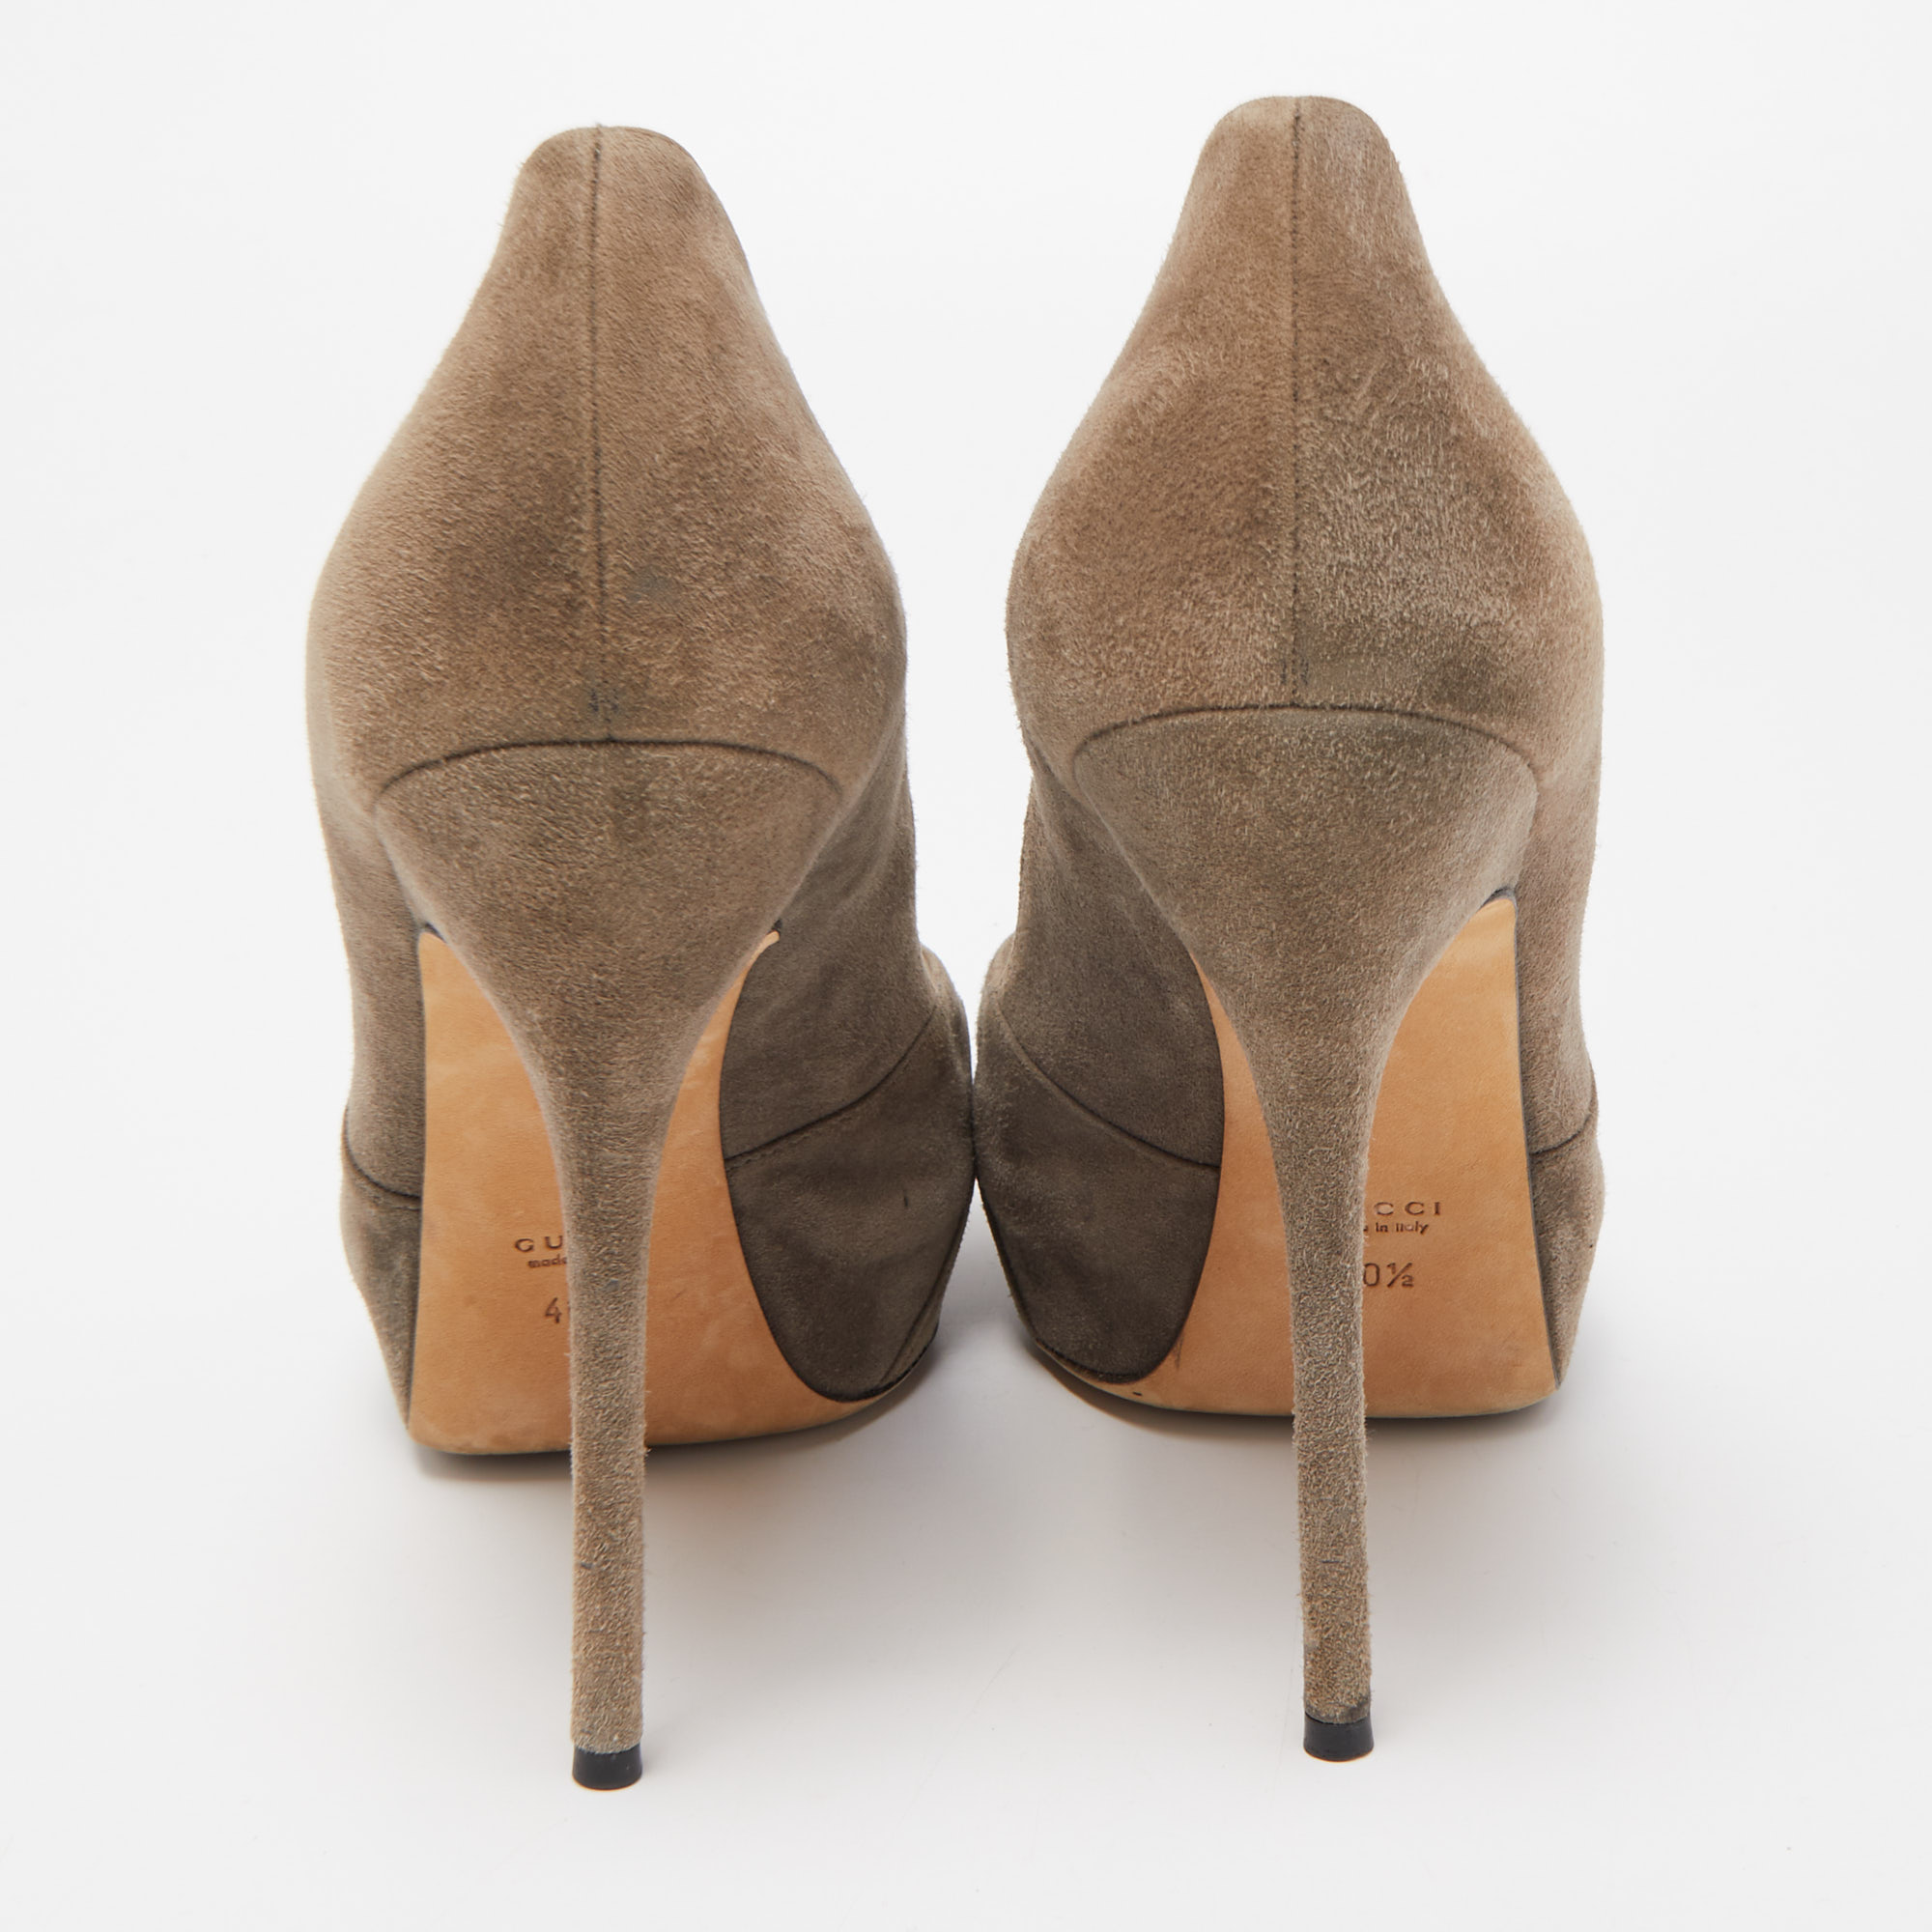 Gucci Grey Suede Double Bow Peep Toe Pumps Size 40.5